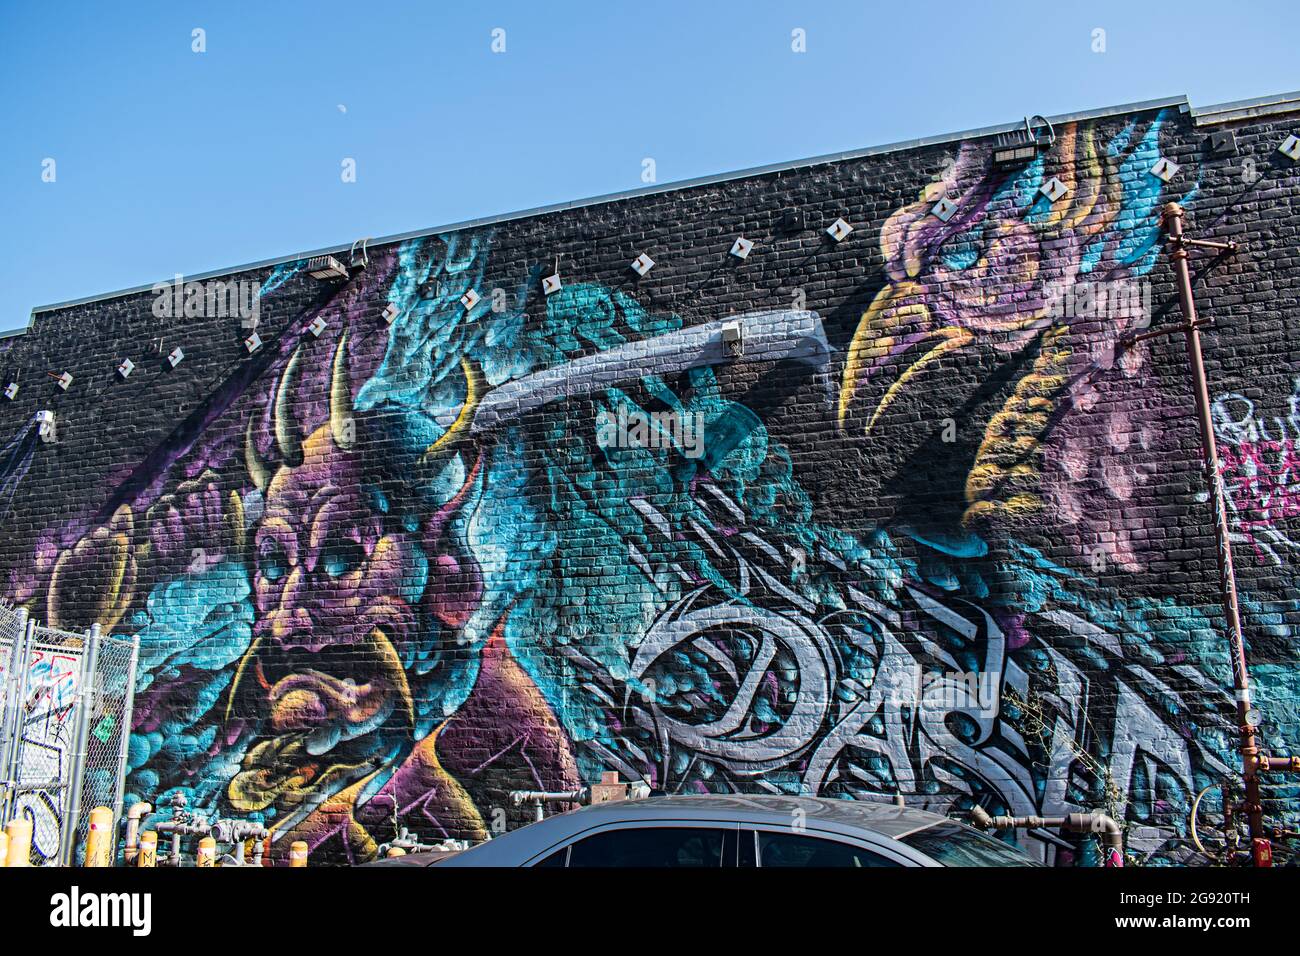 Murals and street art from the Arts District in Los Angeles California Stock Photo